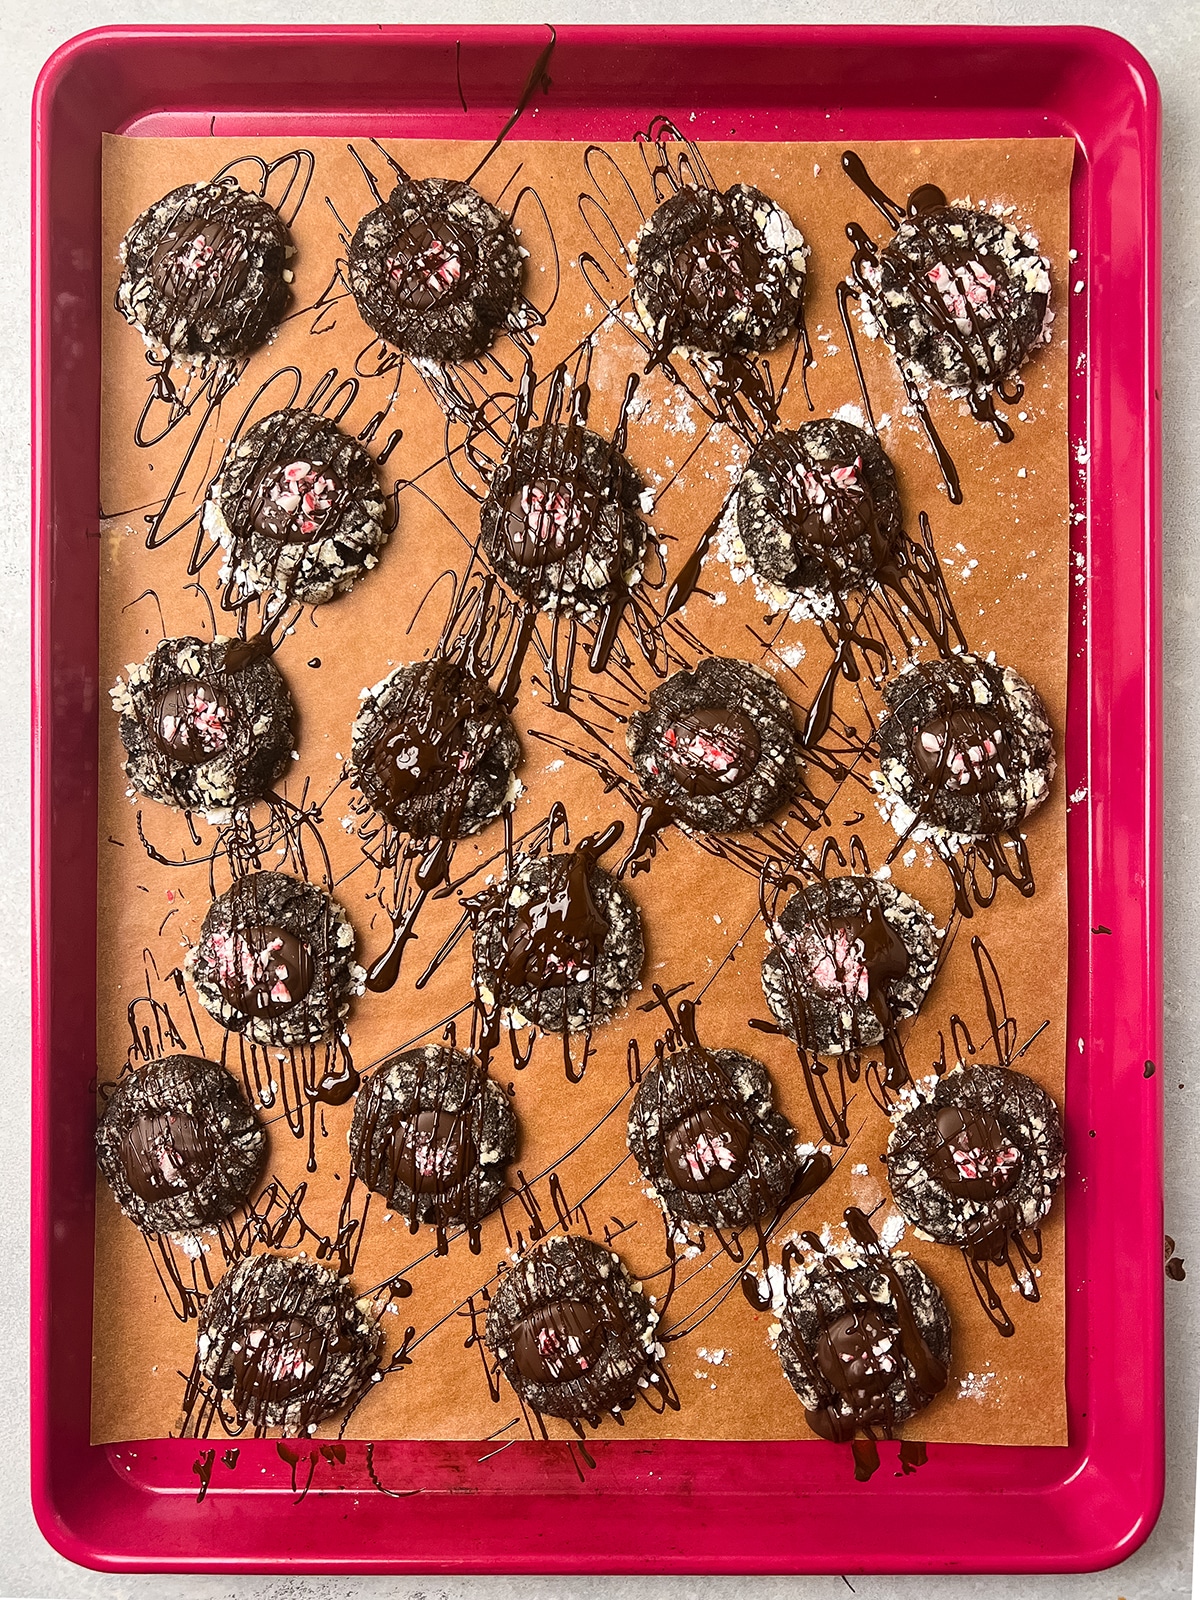 Thumbprint cookies on a pink sheet pan lined with parchment paper.